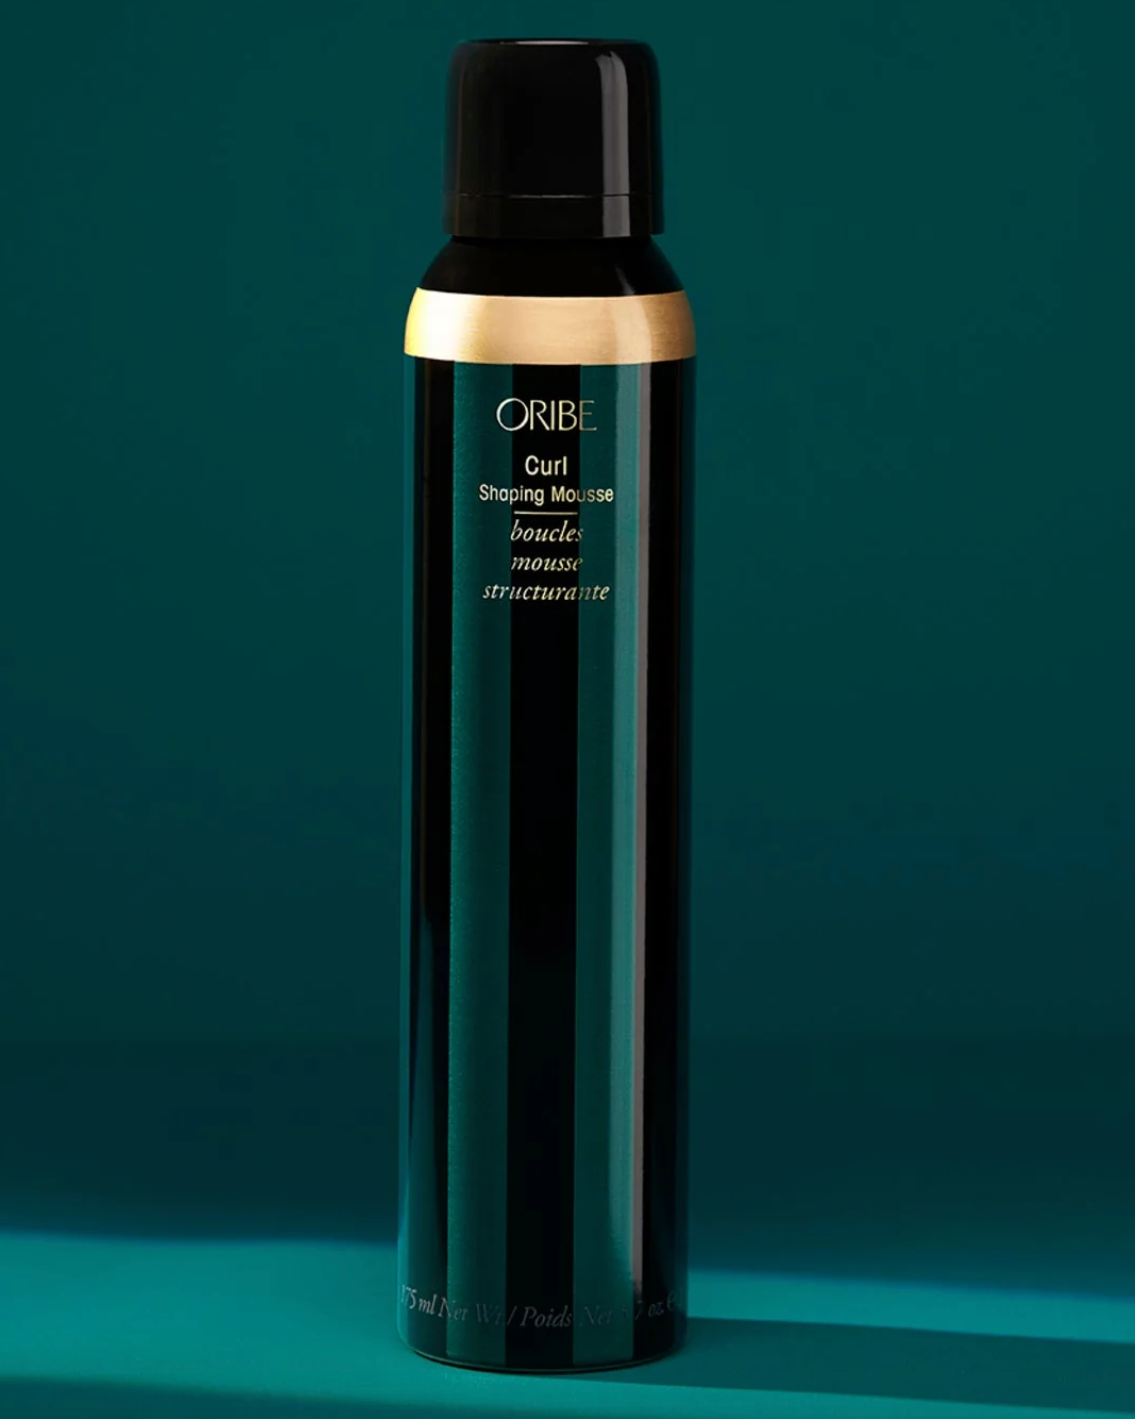 ORIBE Curl Shaping Mousse